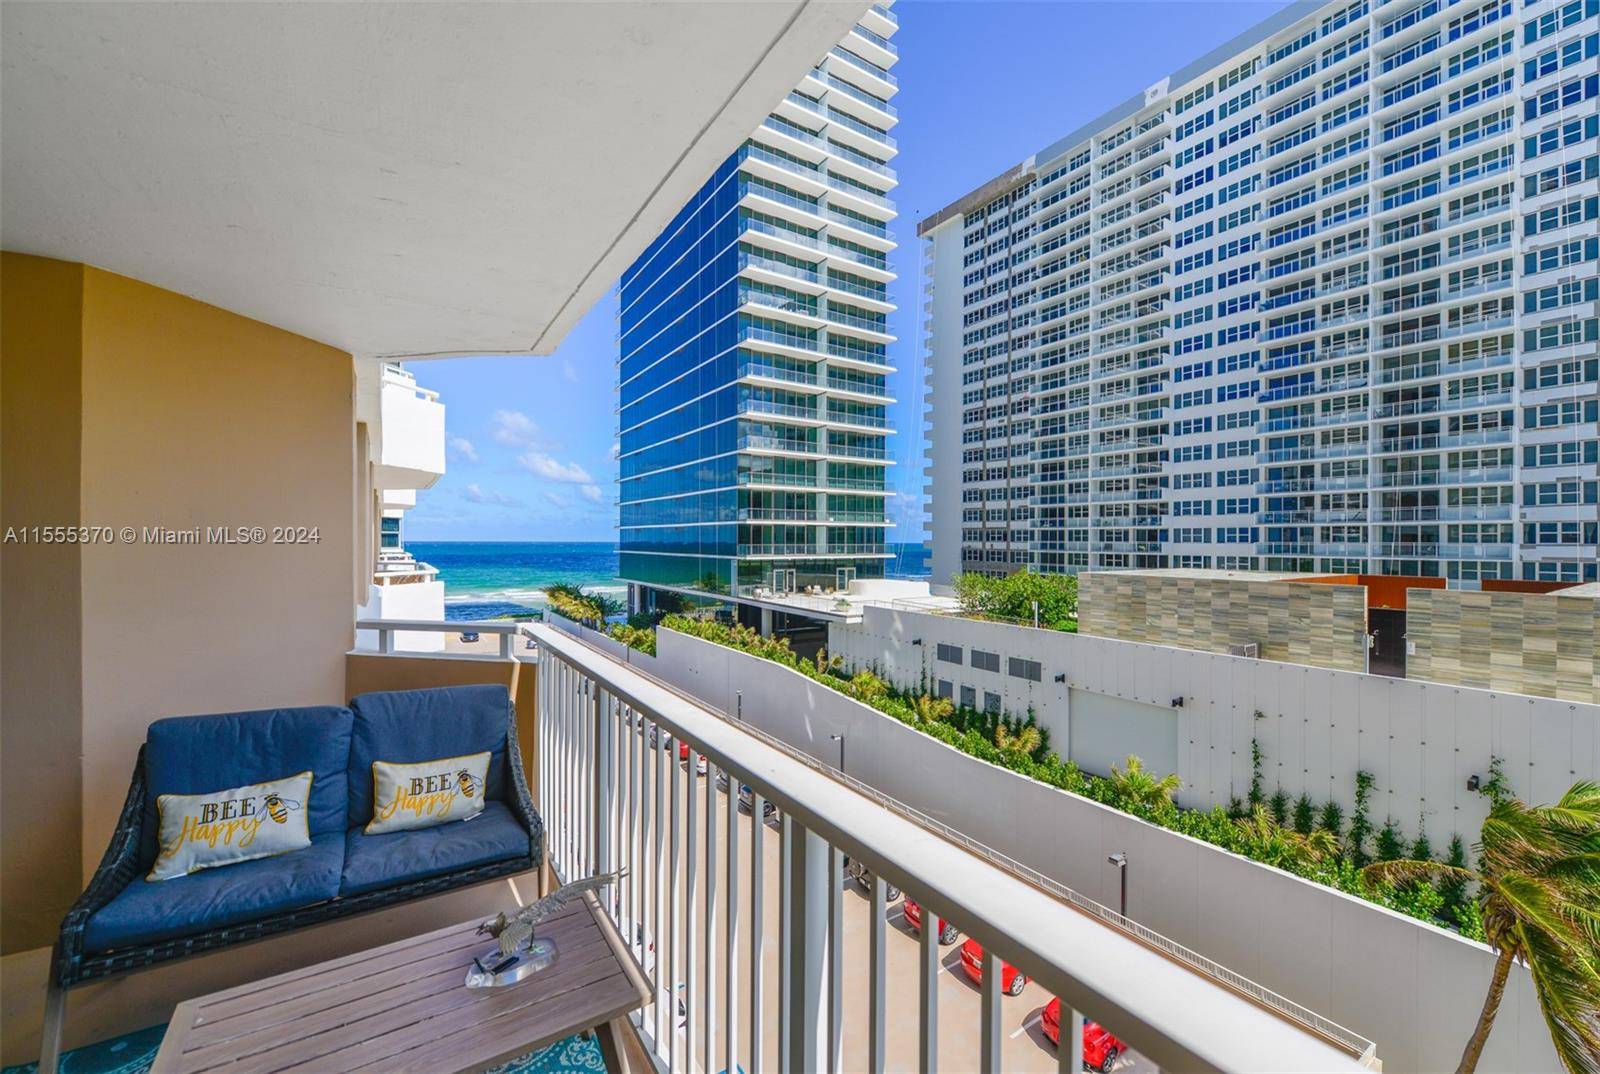 Remodeled 2 bedroom condo with southern ocean views from the patio and tile and wood floors throughout.